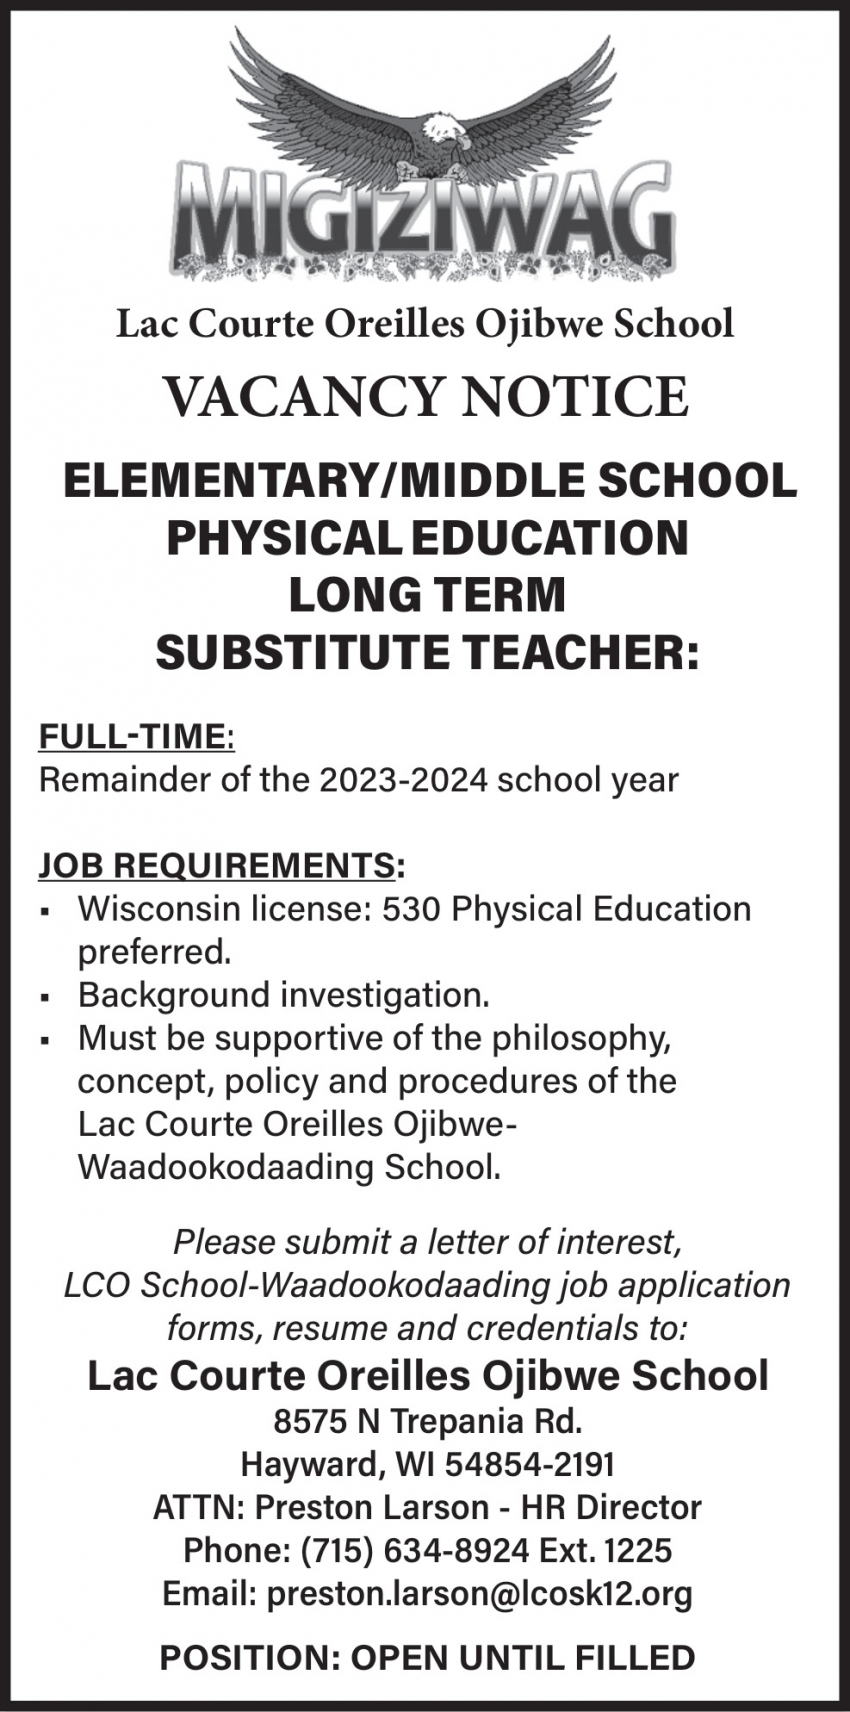 Elementary/Middle School Physical Education Long Term Substitute Teacher